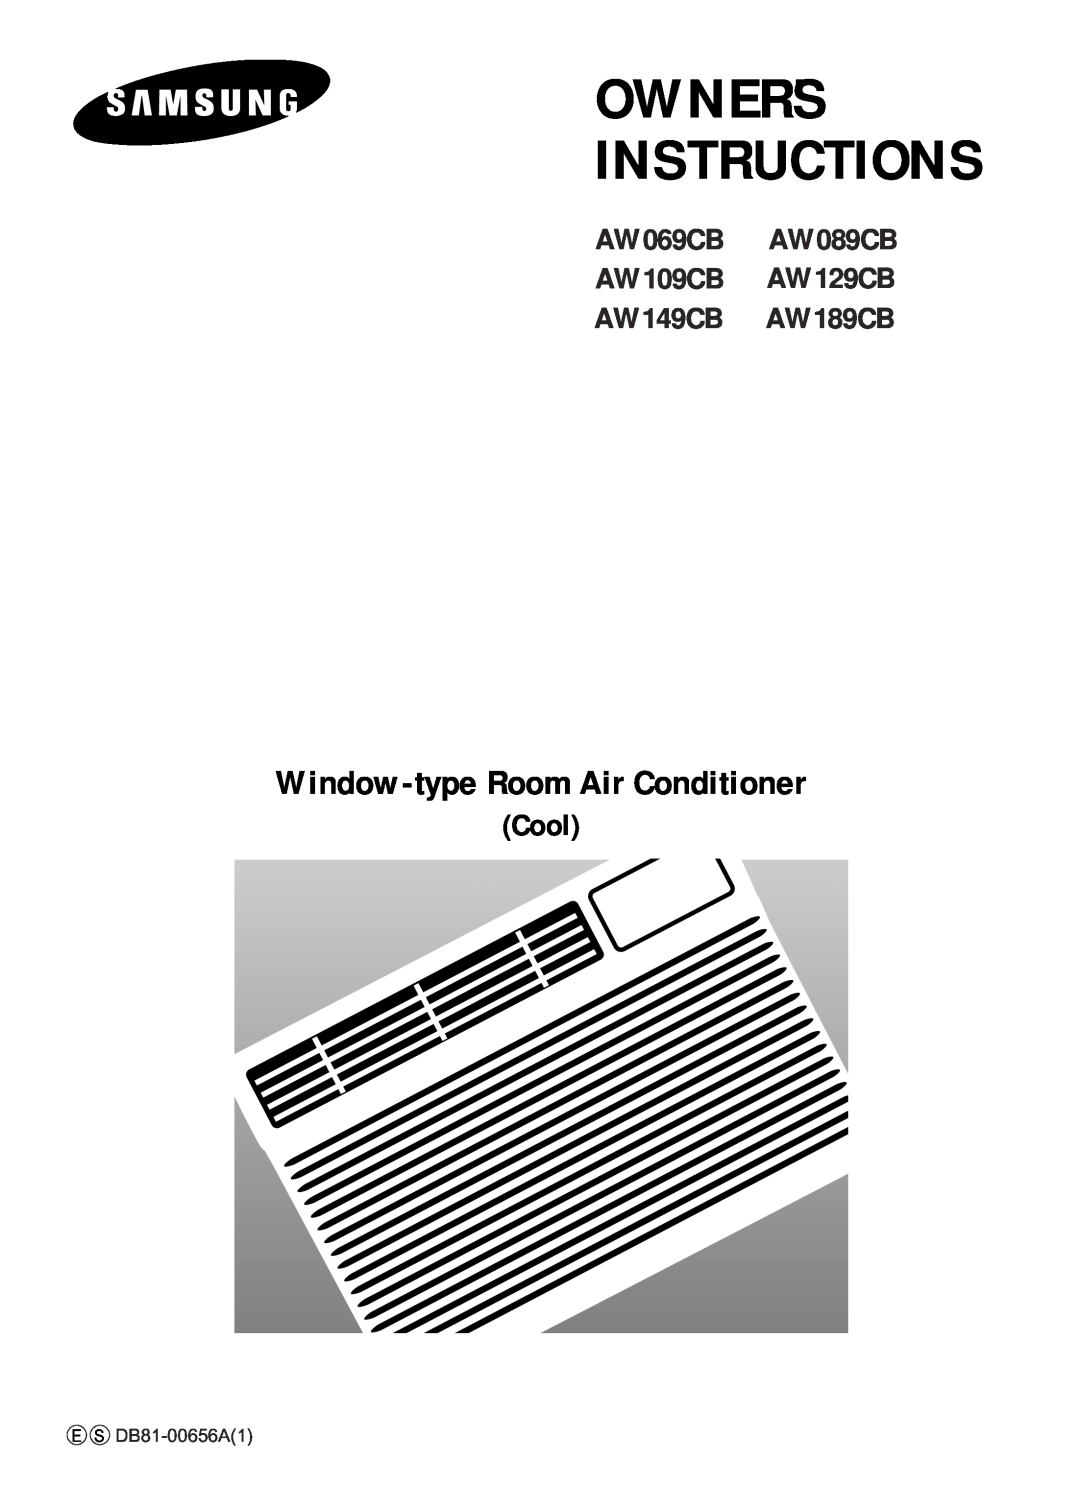 Samsung AW189CB, AW069CB, AW129CB, AW149CB manual Owner’S Instructions, Window-typeRoom Air Conditioner, Cool, 6 B81-00656A1 